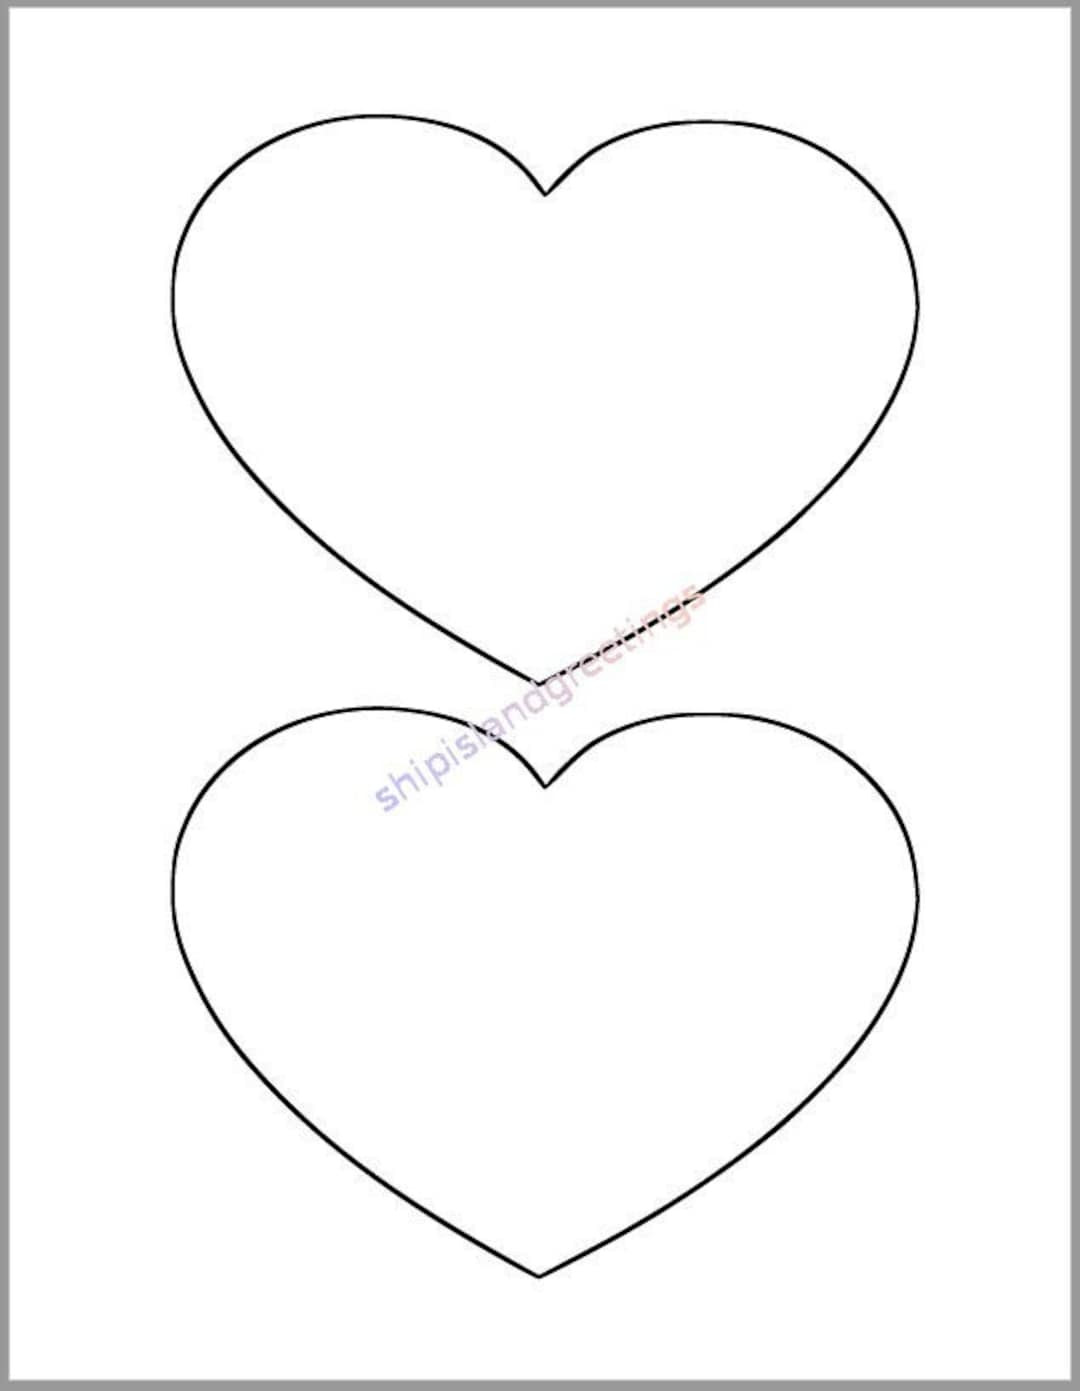 6 Inch Heart Printable Template-large Heart Cutout-valentines Day  Decor-kids Crafts-valentine Printable-large Printable Heart-diy Valentines  